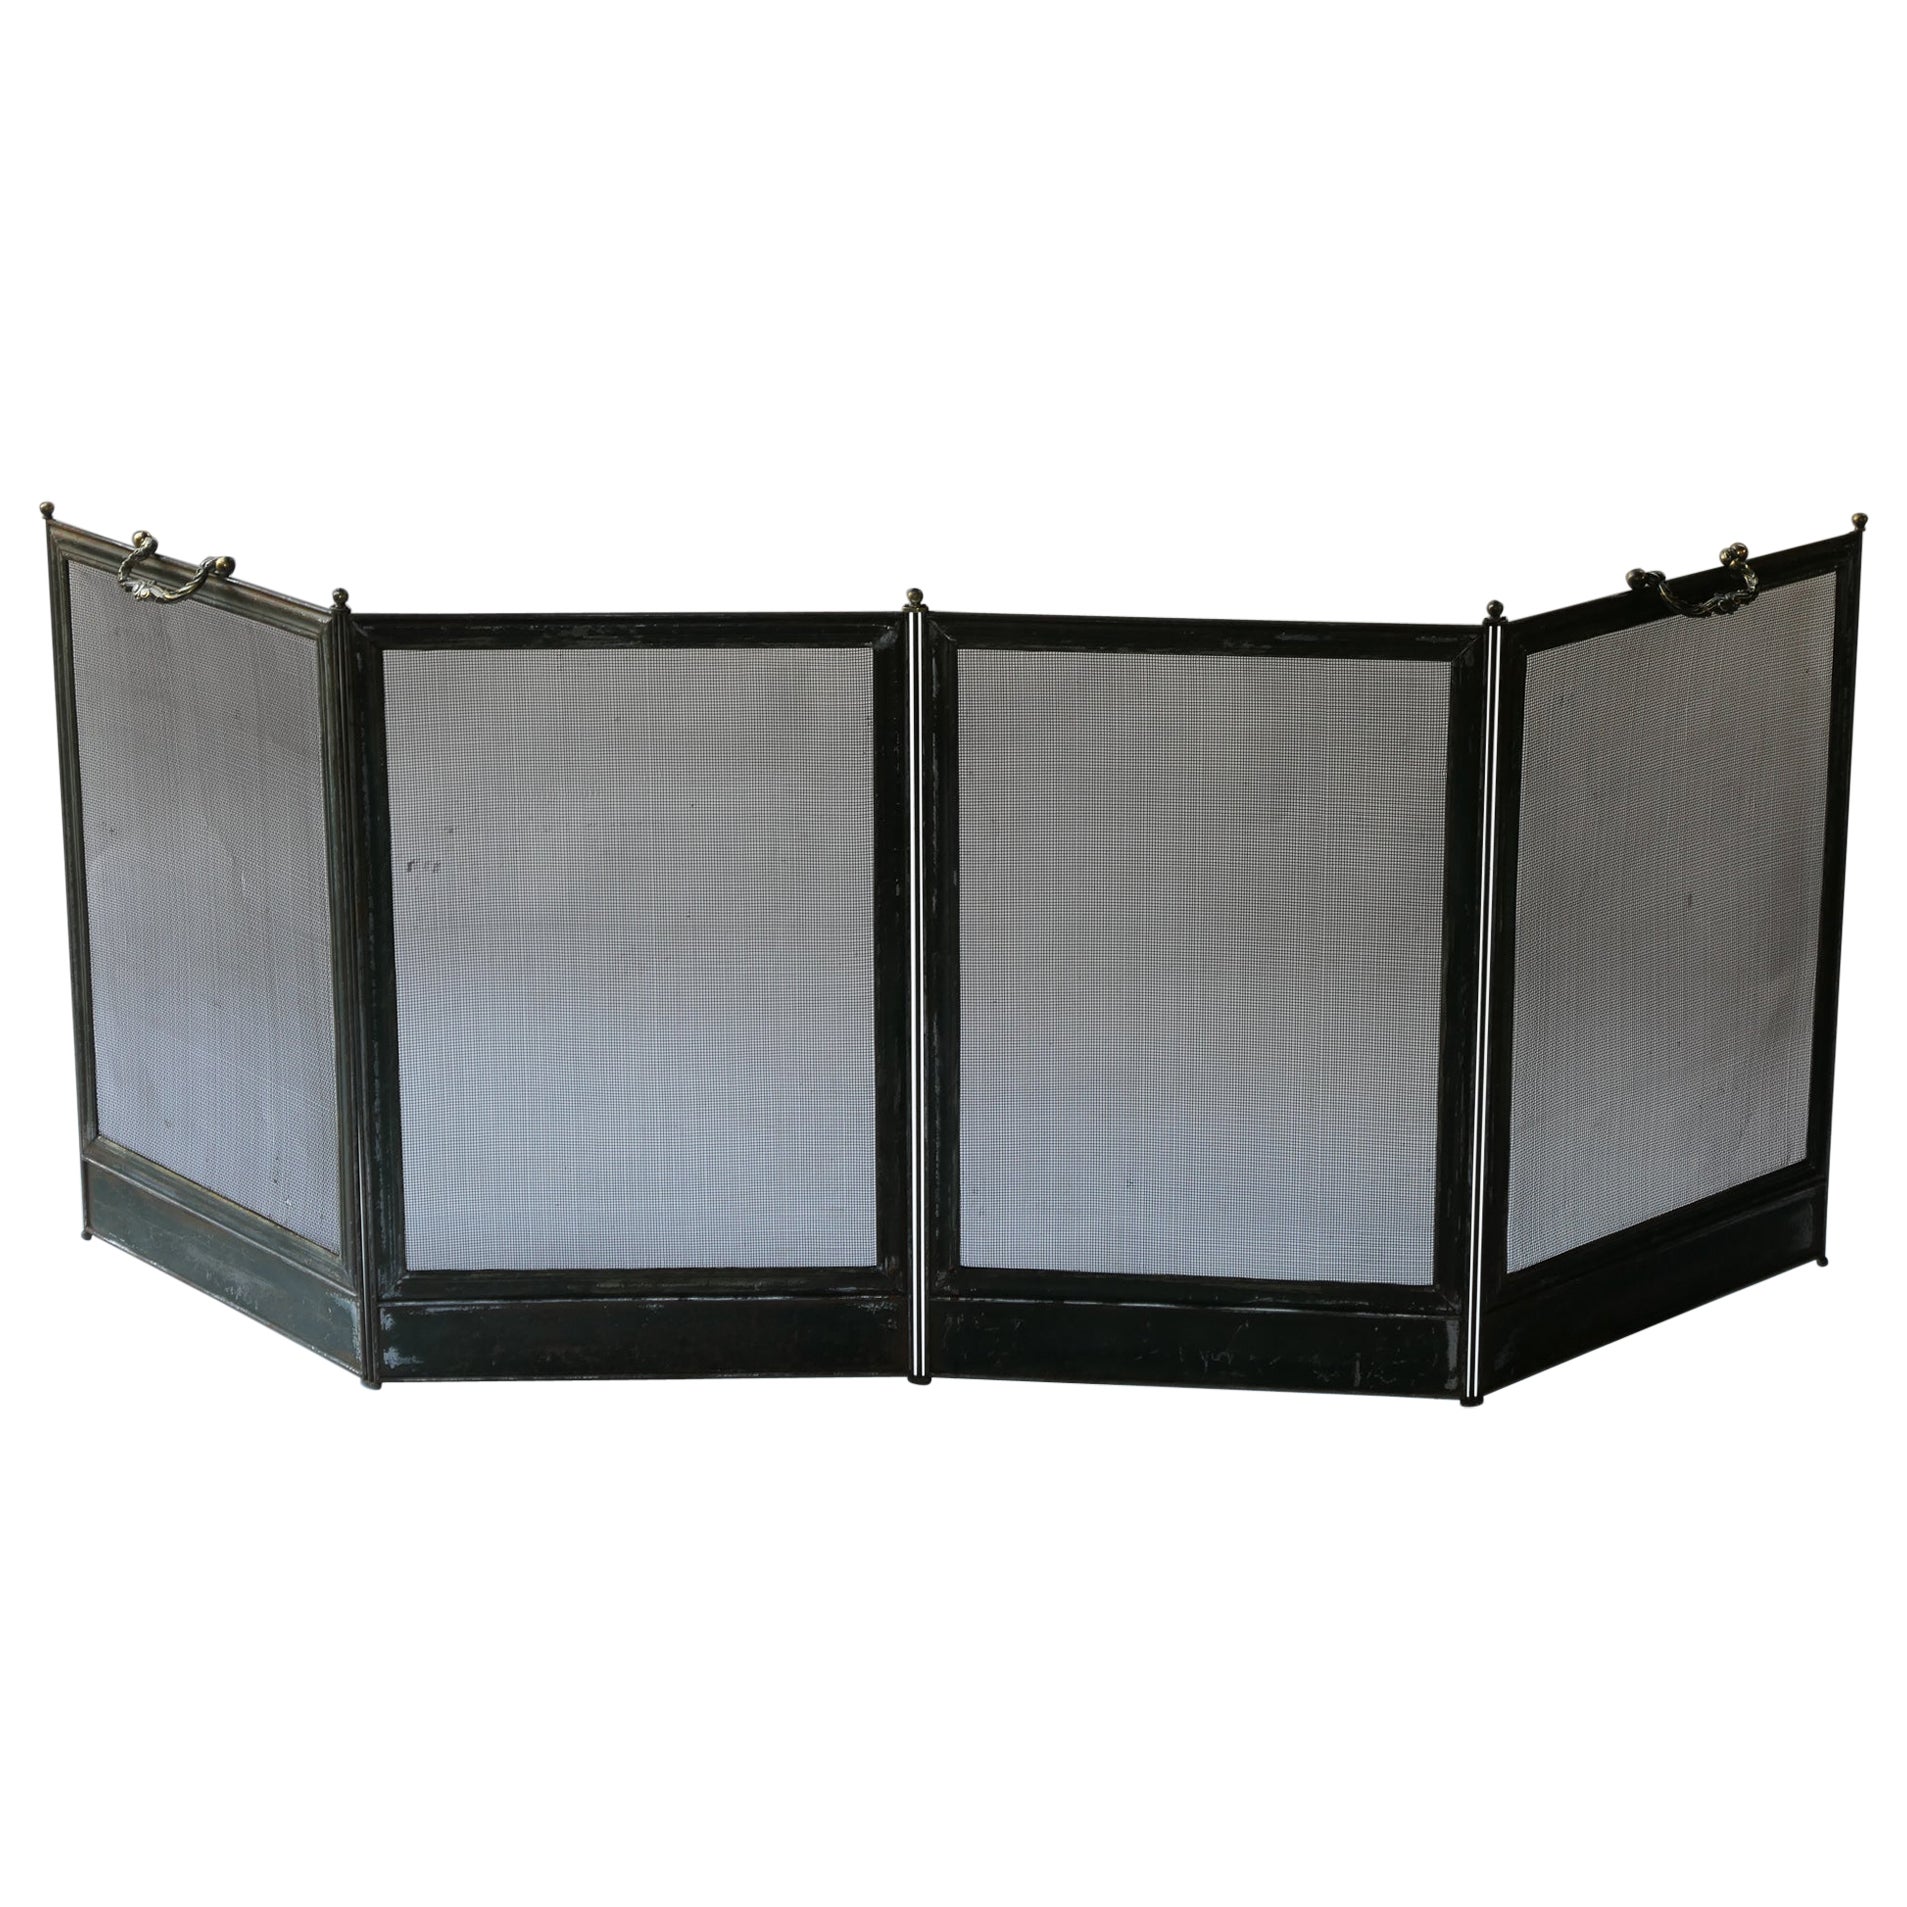 Antique French Napoleon III Fireplace Screen or Fire Screen, 19th - 20th Century For Sale